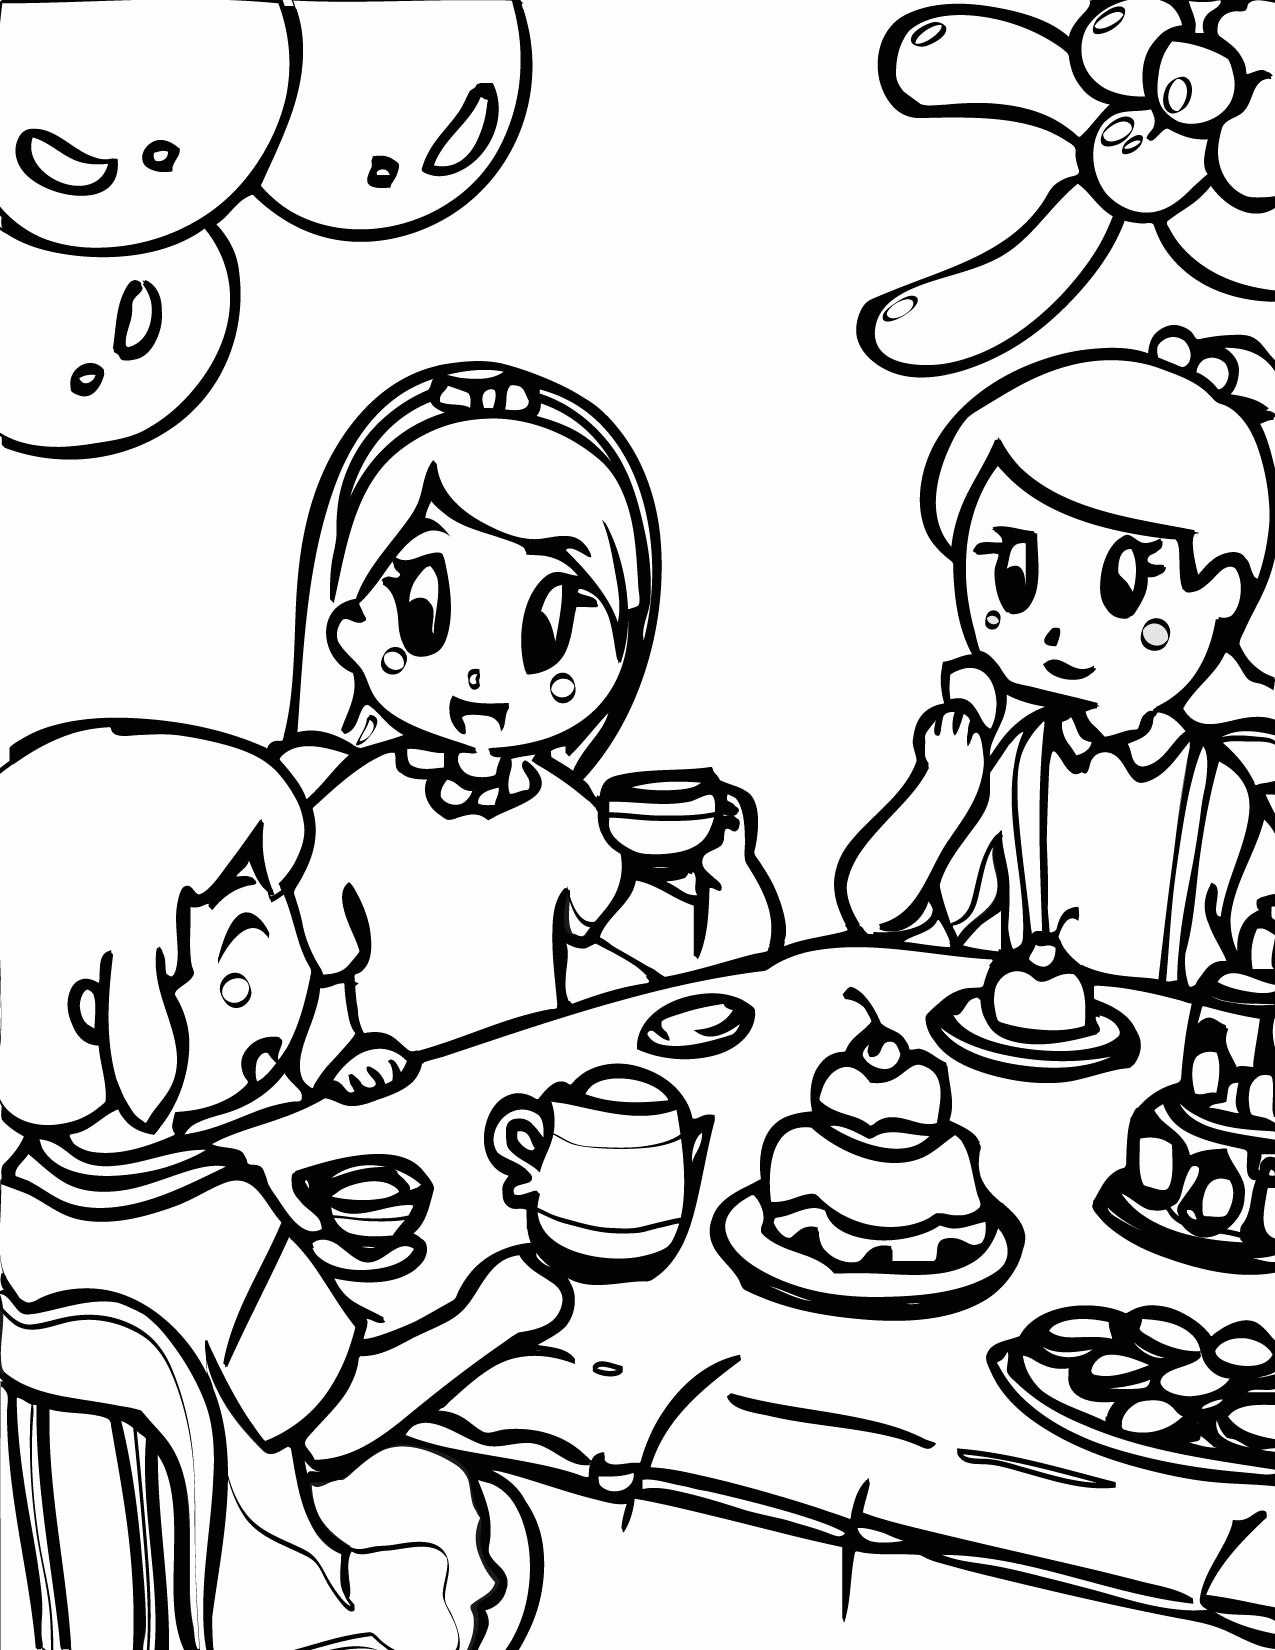 12 Pics of Tea Party Coloring Pages Free - Printable Tea Party ...